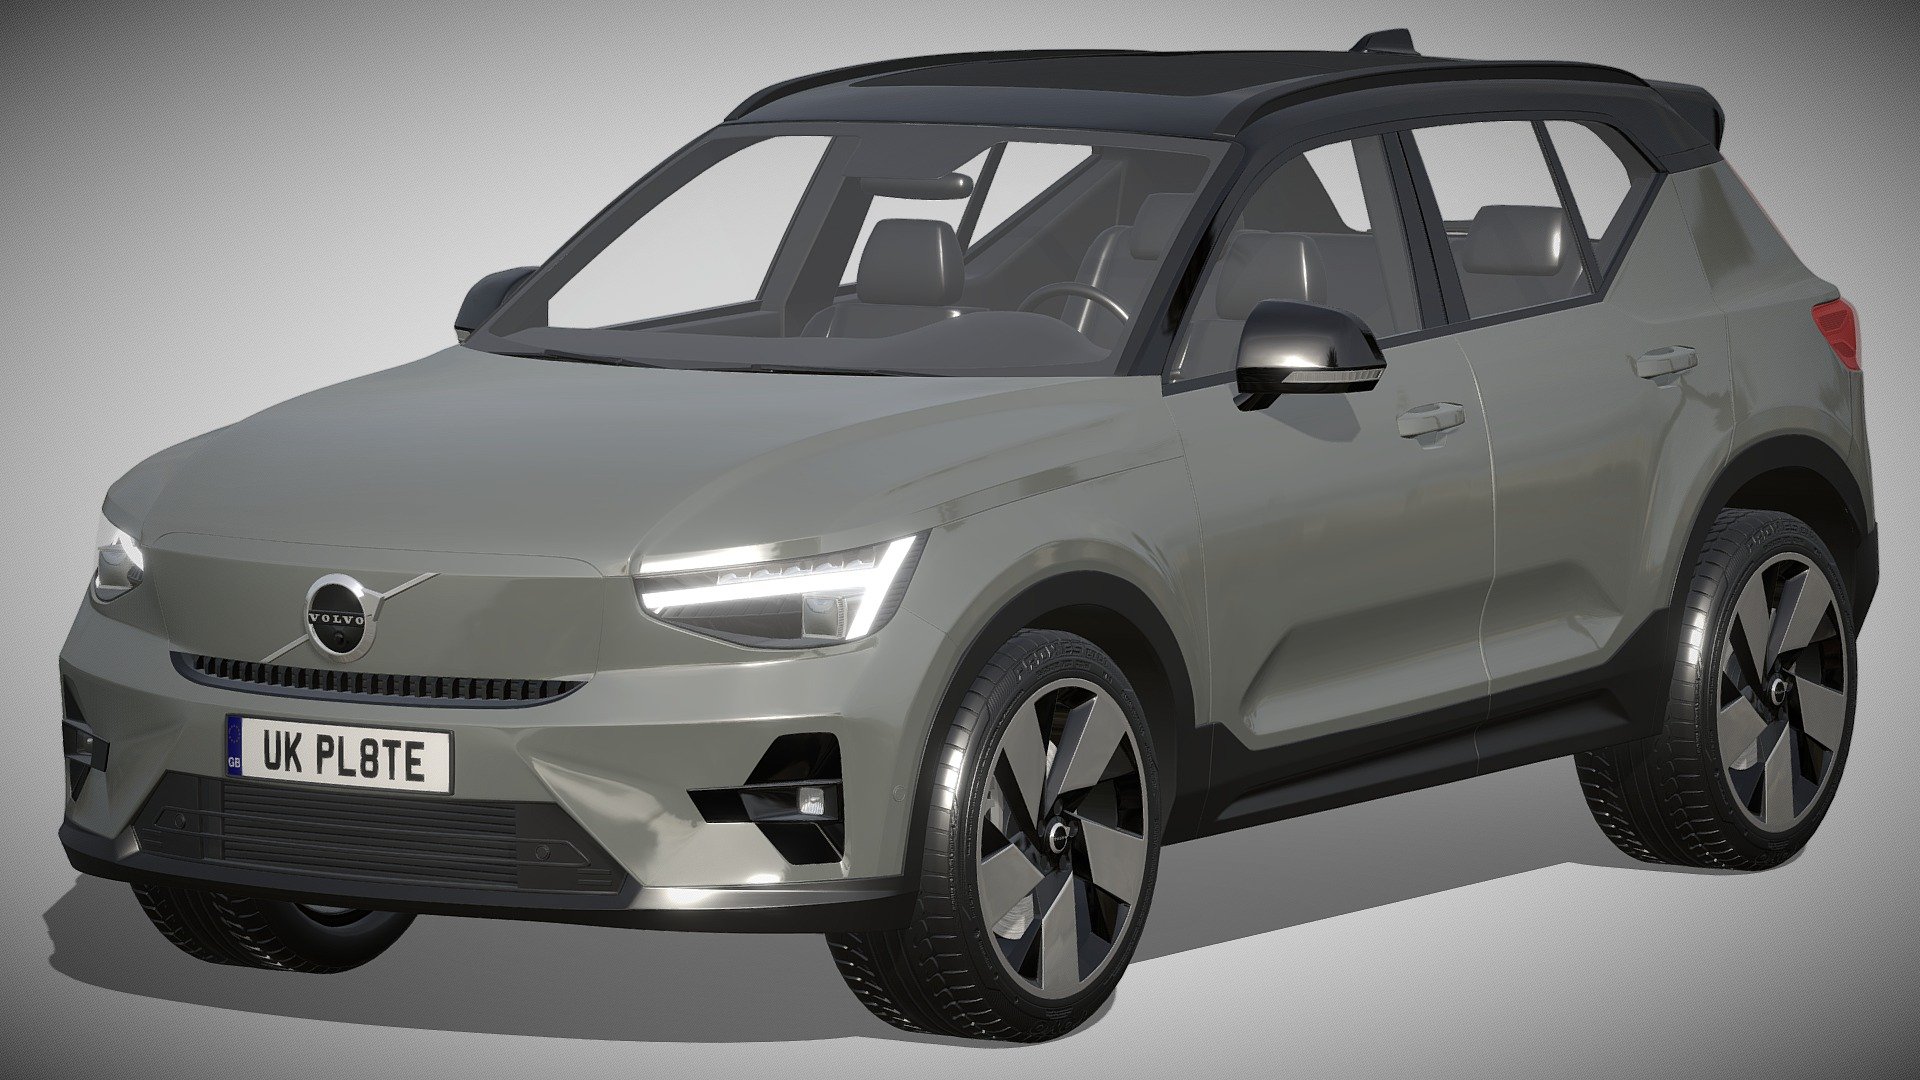 VOLVO XC40 Recharge 2023

https://www.volvocars.com/uk/cars/xc40-hybrid/

Clean geometry Light weight model, yet completely detailed for HI-Res renders. Use for movies, Advertisements or games

Corona render and materials

All textures include in *.rar files

Lighting setup is not included in the file! - VOLVO XC40 Recharge 2023 - Buy Royalty Free 3D model by zifir3d 3d model